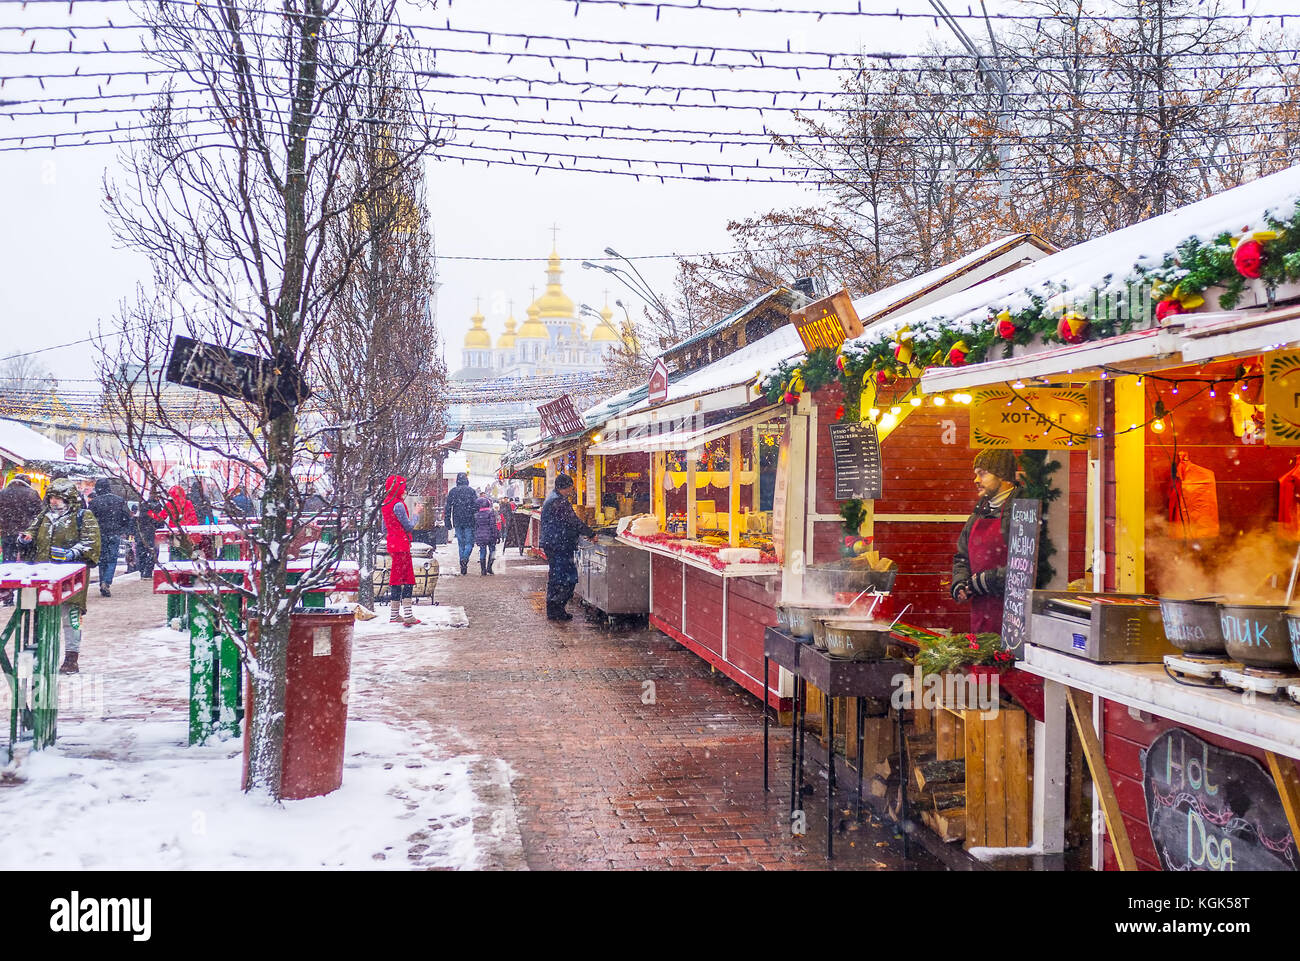 KIEV, UKRAINE - JANUARY 4, 2017: The Christmas Market starts at St Michael Square with stalls, offering snacks and drinks and then stretches along Vla Stock Photo